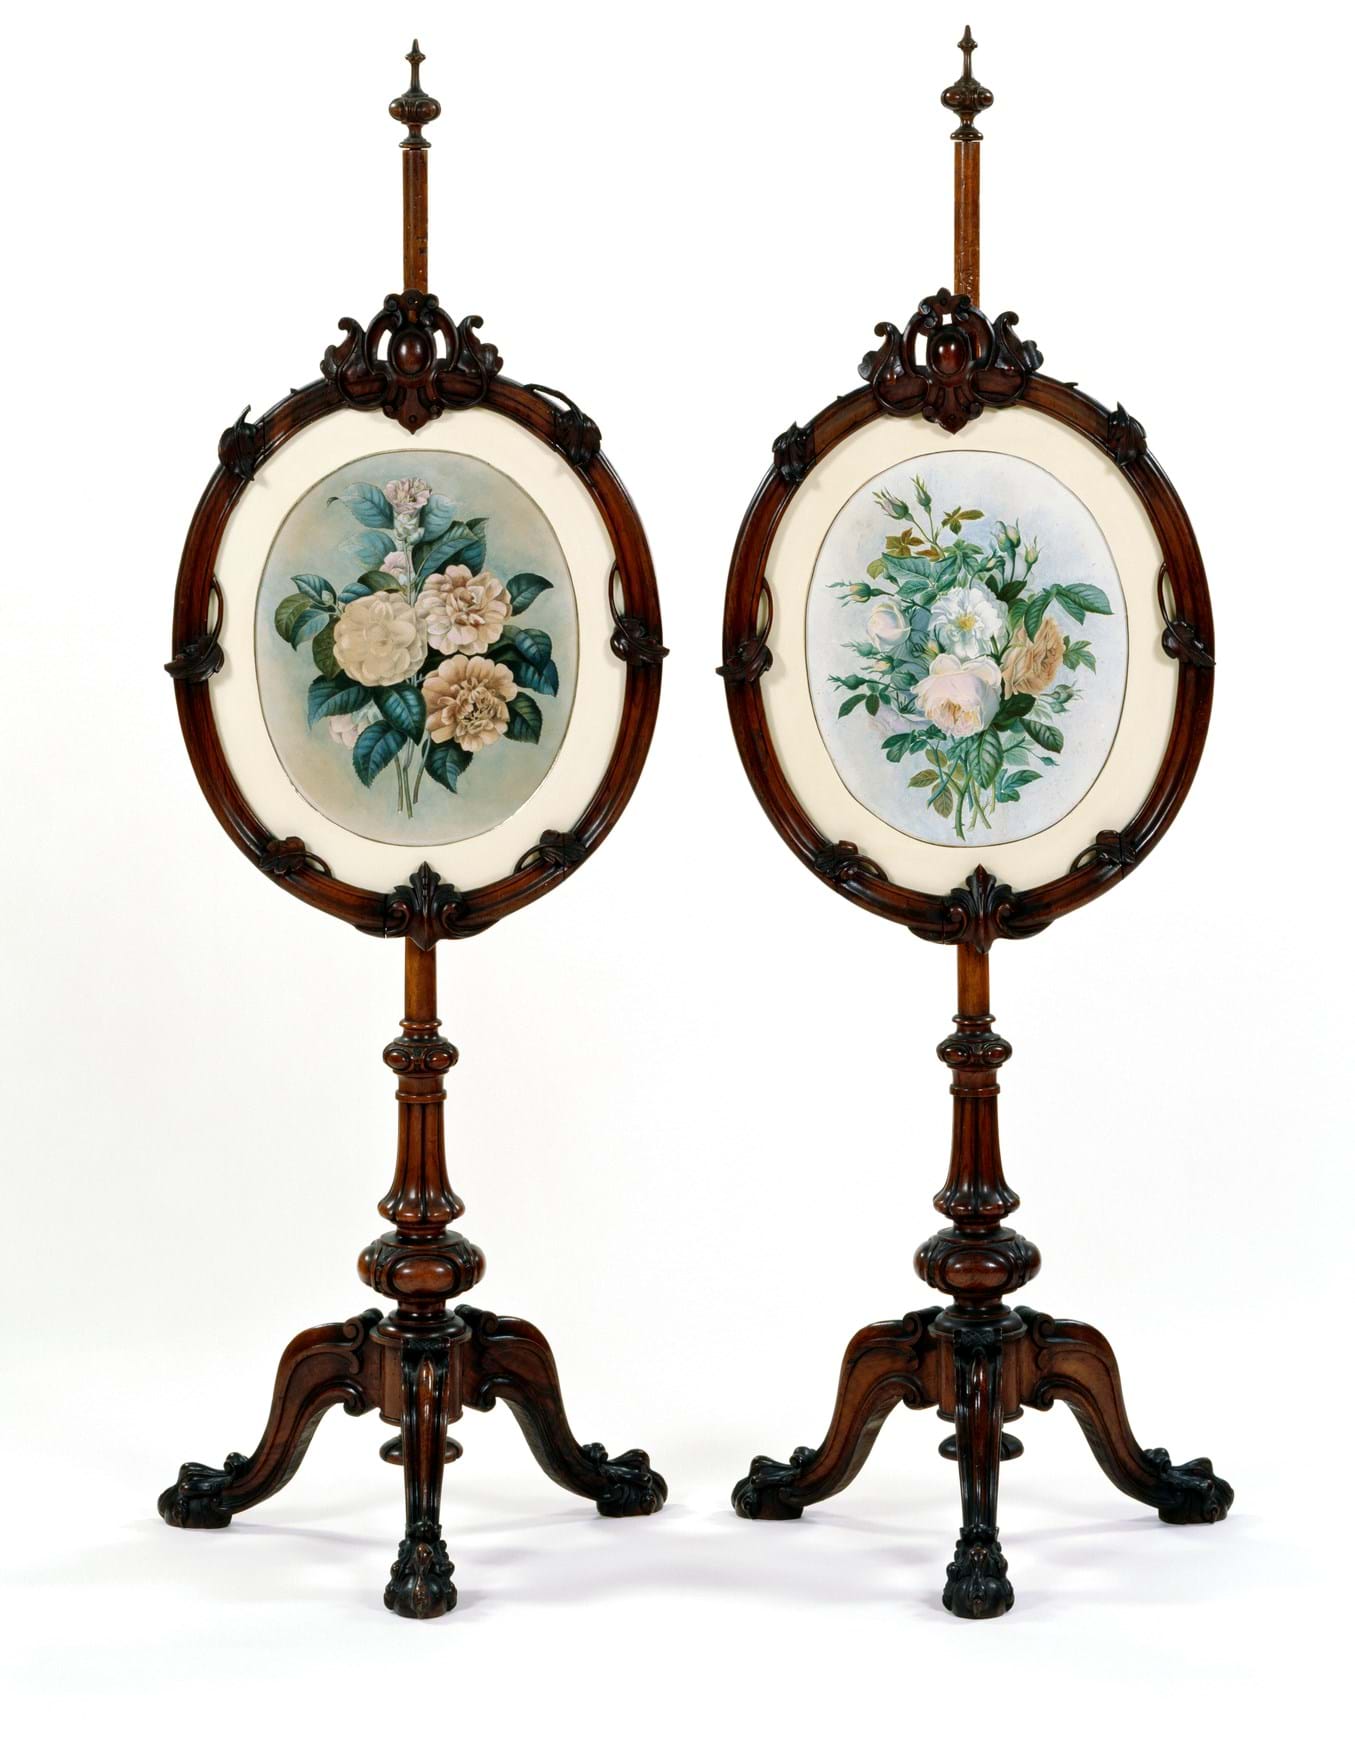 A pair of walnut fire screens with a floral decoration